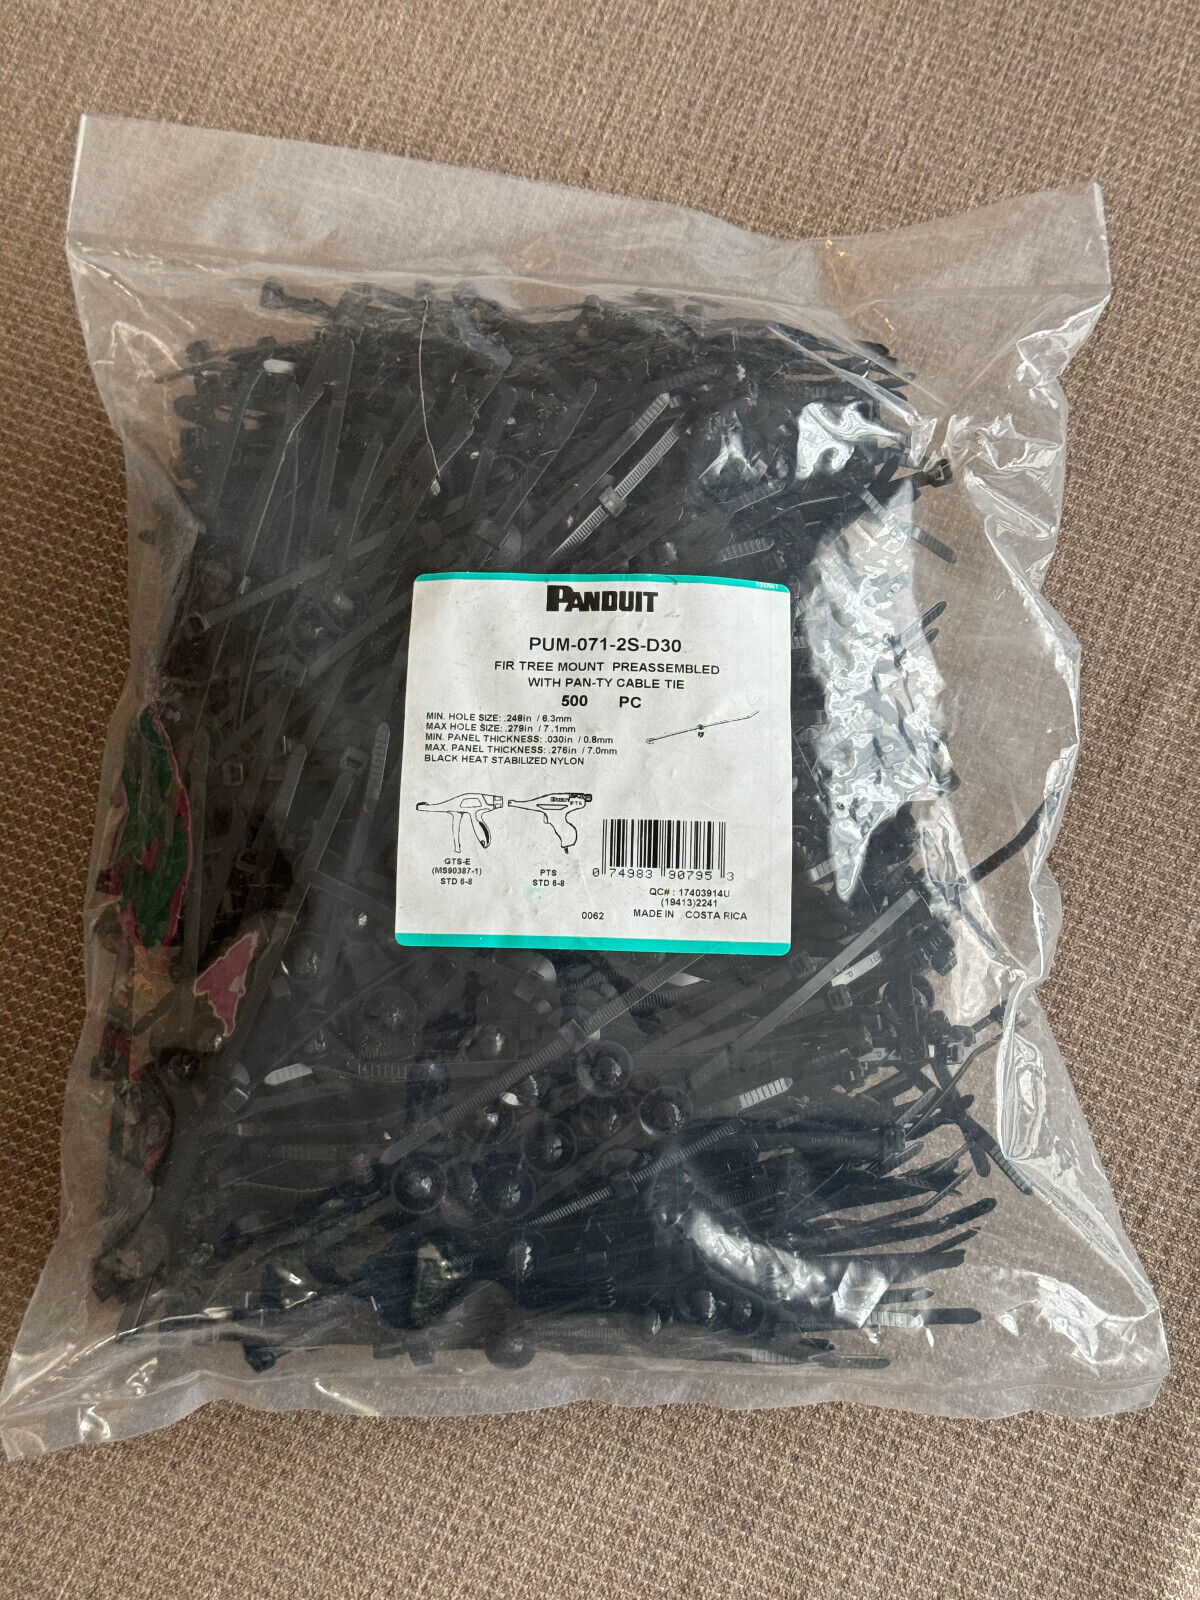 Primary image for Panduit PUM-071-2S-D30 Cable Ties with Fir Tree Mounts (500 pcs) 7.4” Push Mount